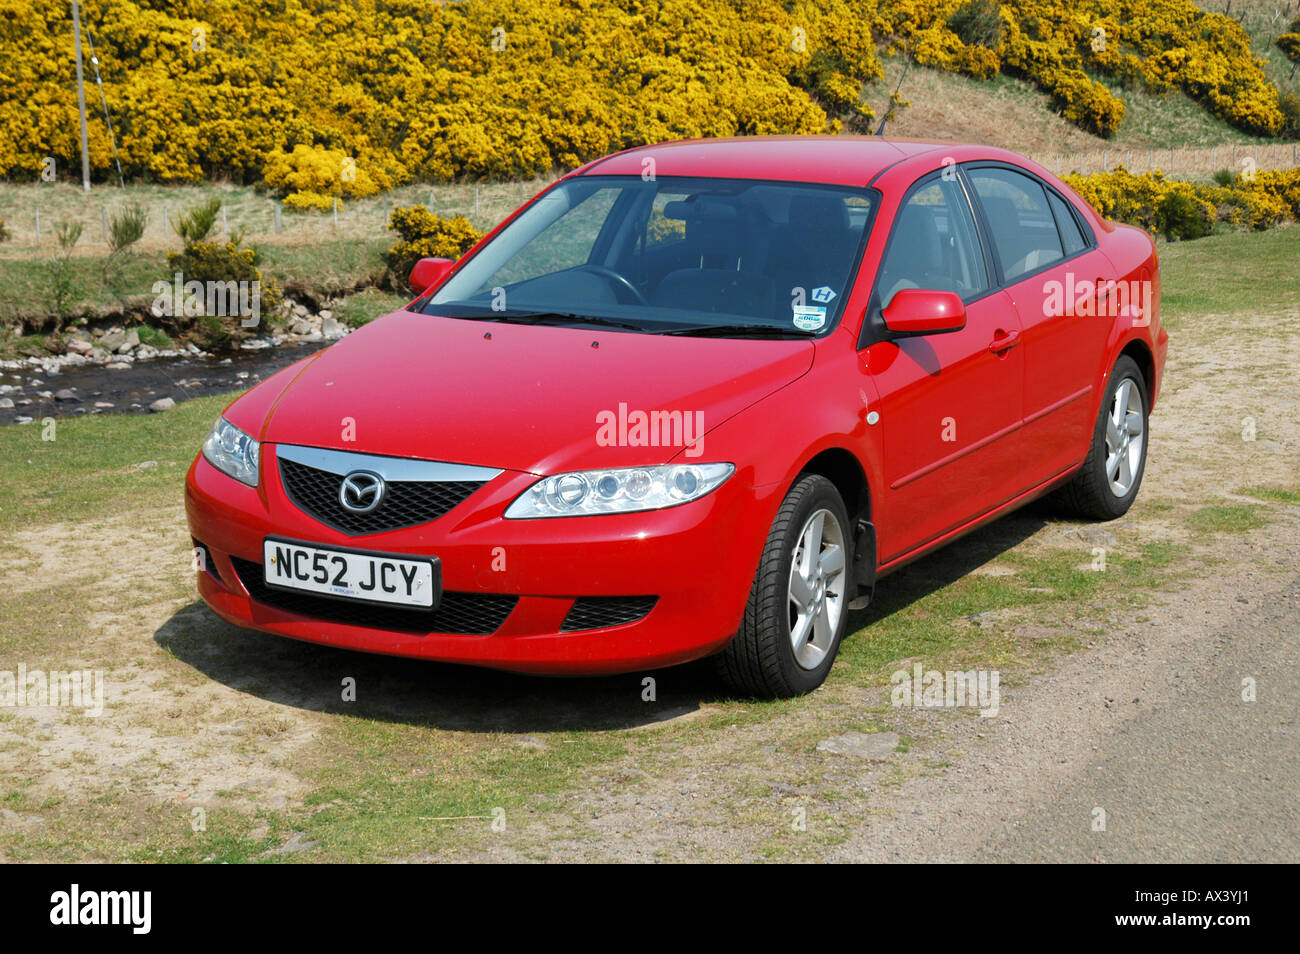 Red mazda 6 saloon car parked at the side of the road in the countryside in the UK. Stock Photo